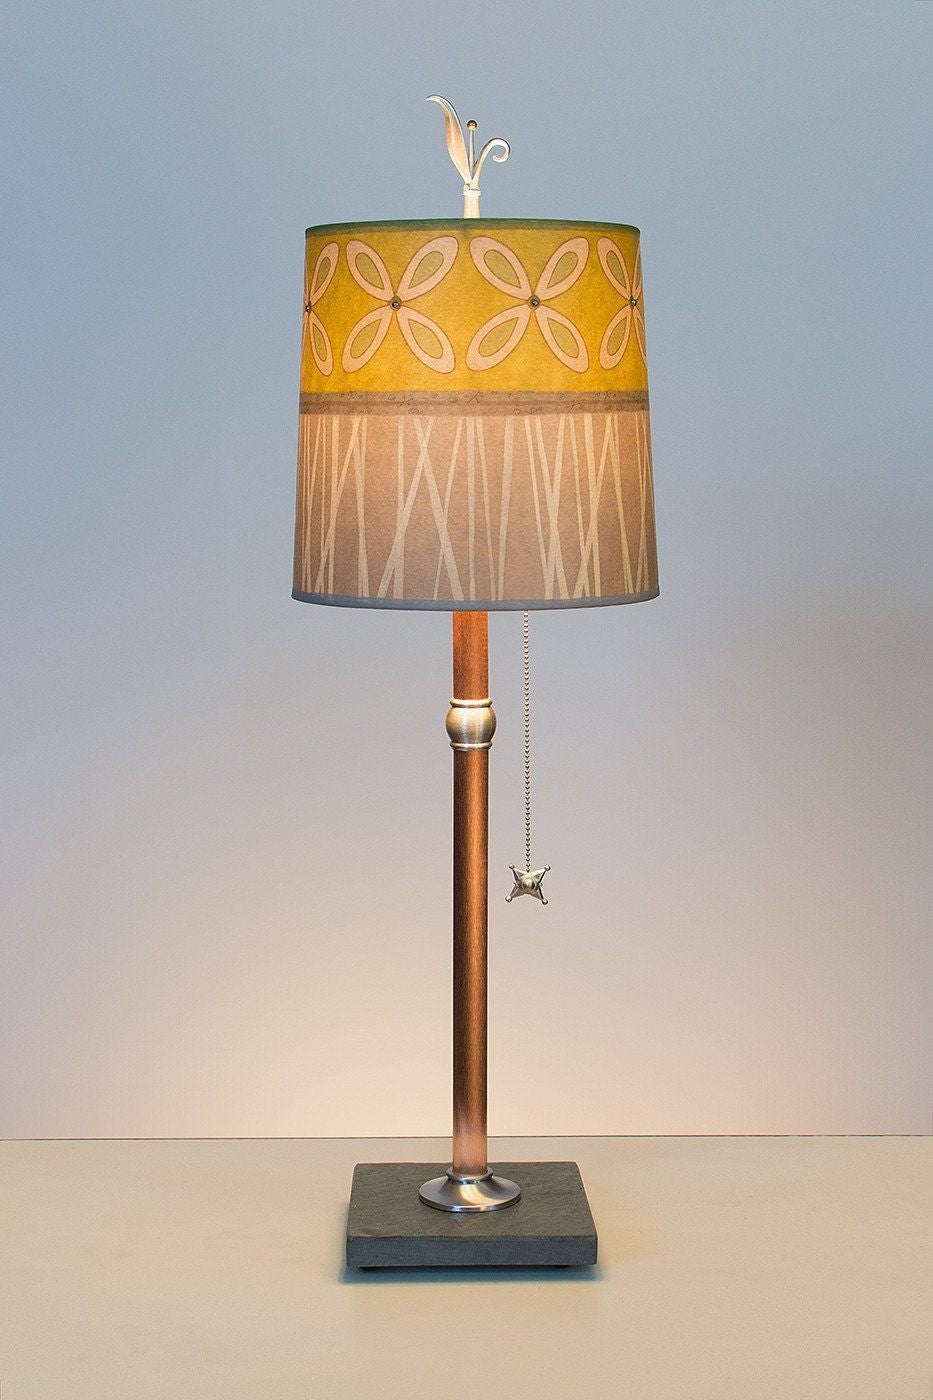 Janna Ugone & Co Table Lamps Copper Table Lamp with Medium Drum Shade in Kiwi